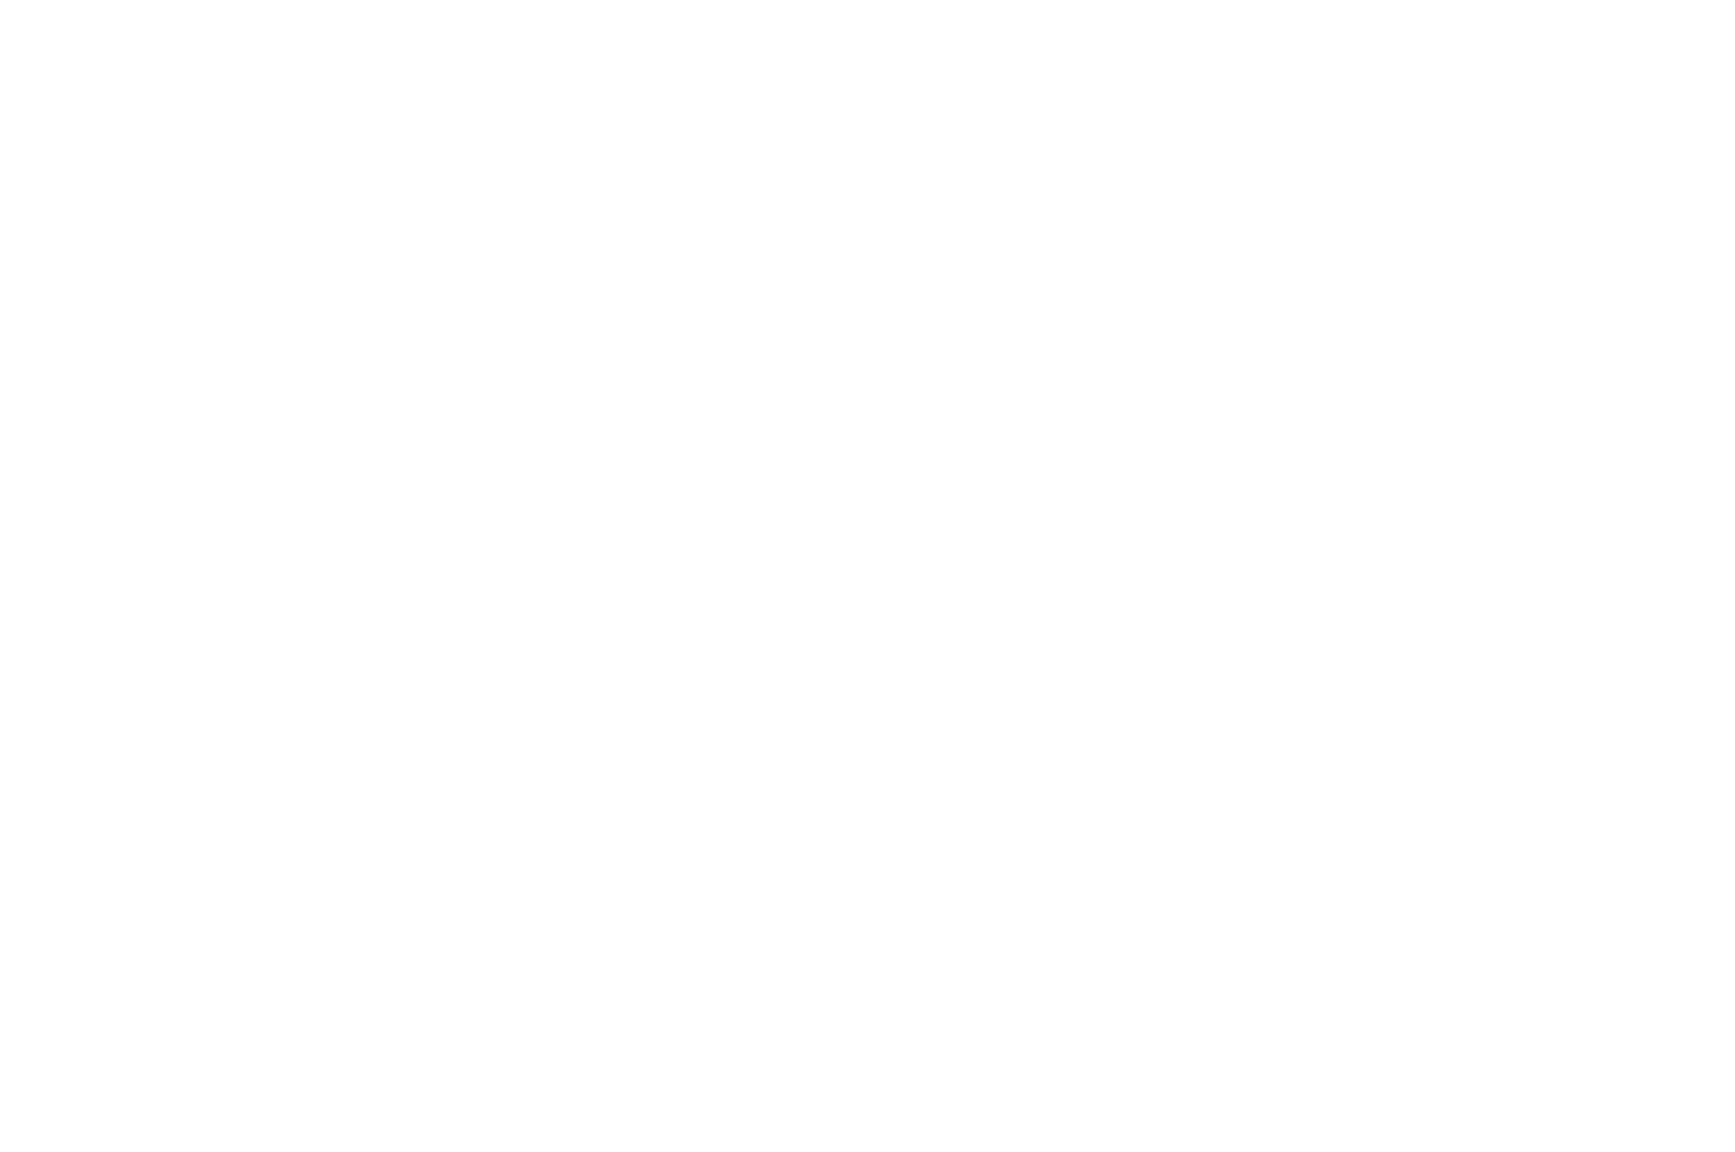 OFFICIAL SELECTION - International Shorts - 2019 (1).png